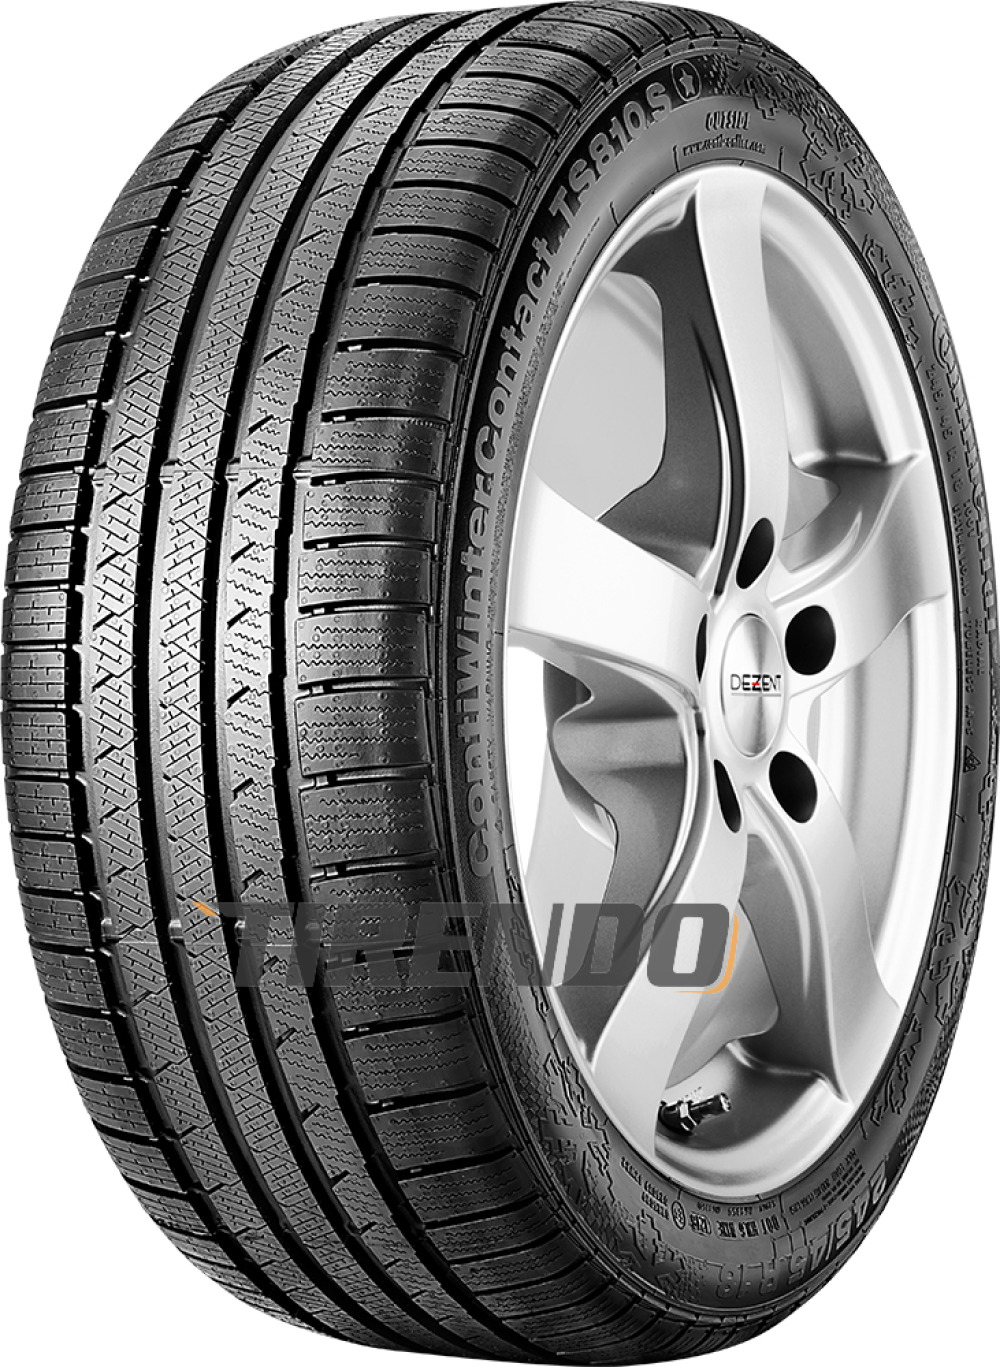 Image of Continental ContiWinterContact TS 810 S ( 235/40 R18 95V XL * )